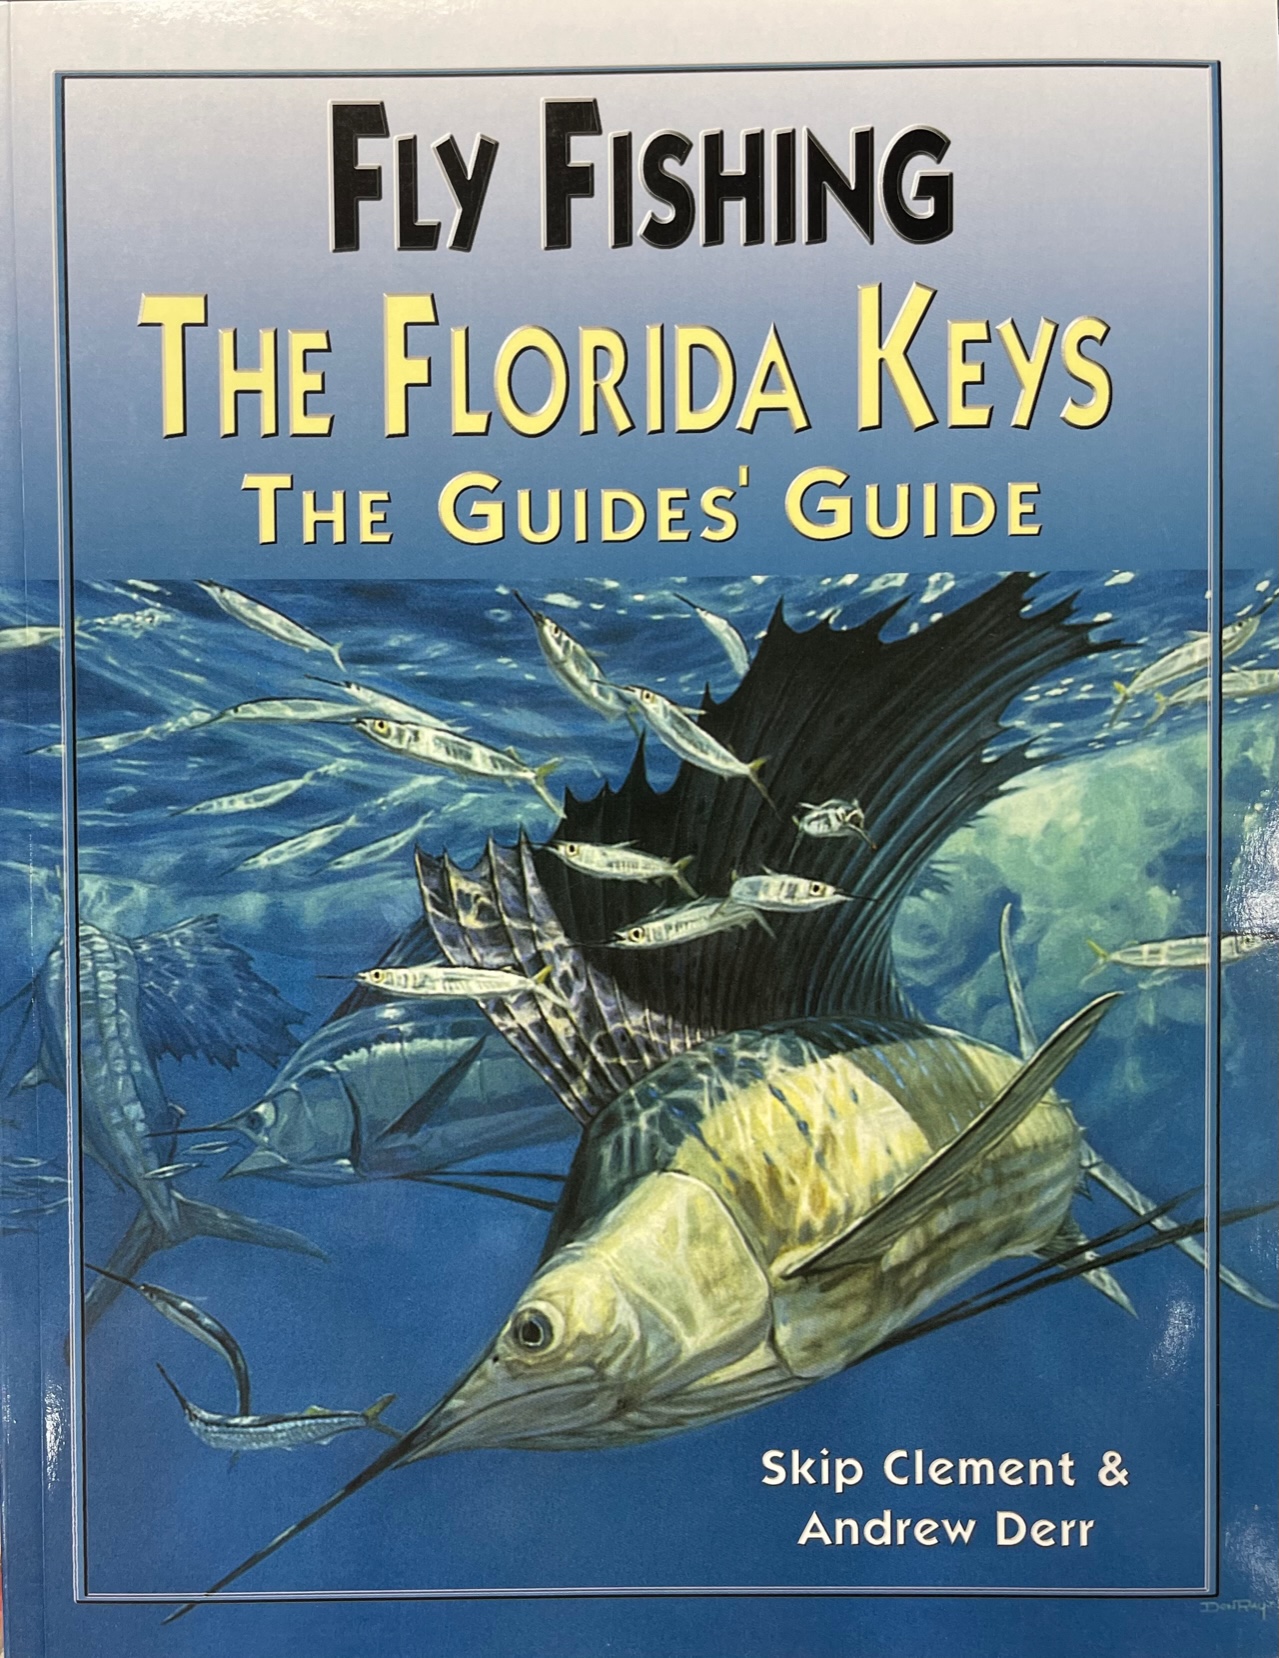 Fly Fishing The Florida Keys - The Guides' Guide - by Skip Clement & Andrew Derr